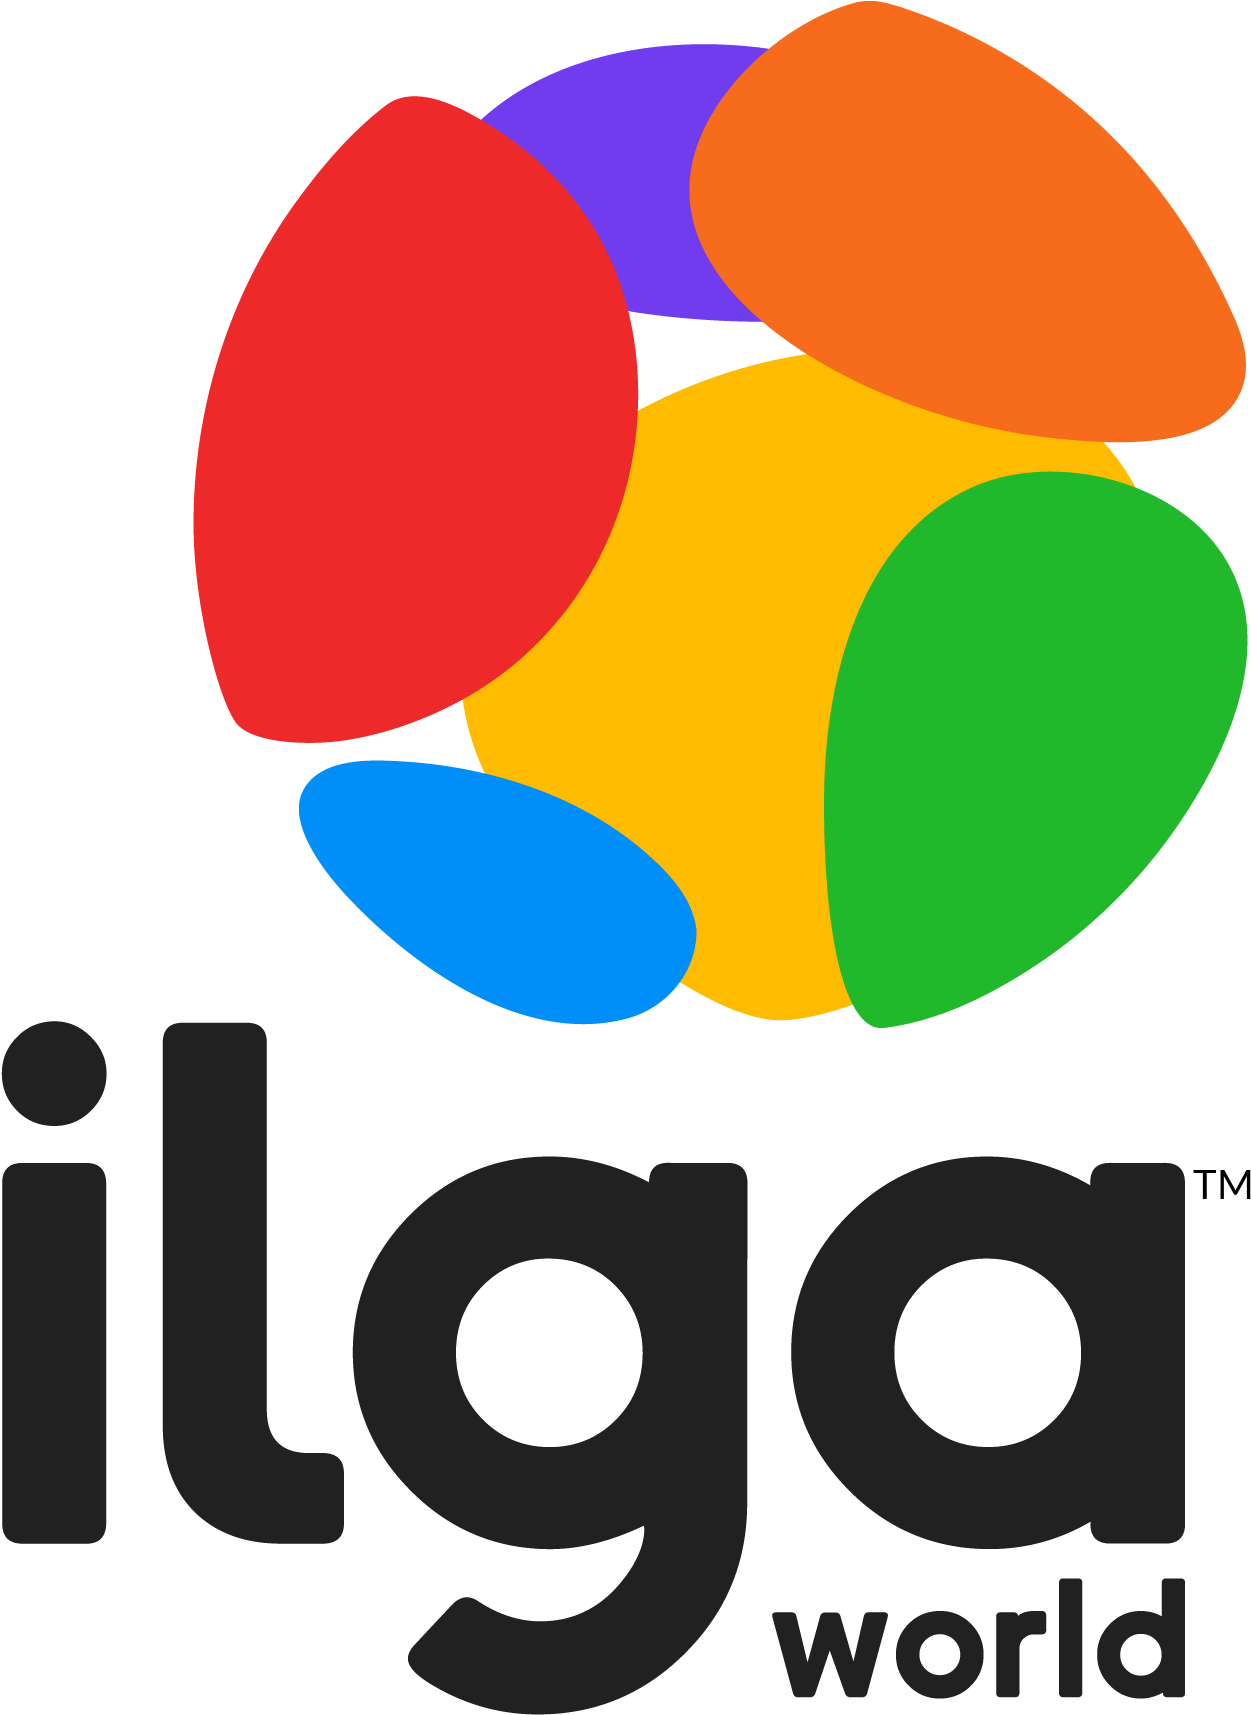 A Logo With Colorful Ovals